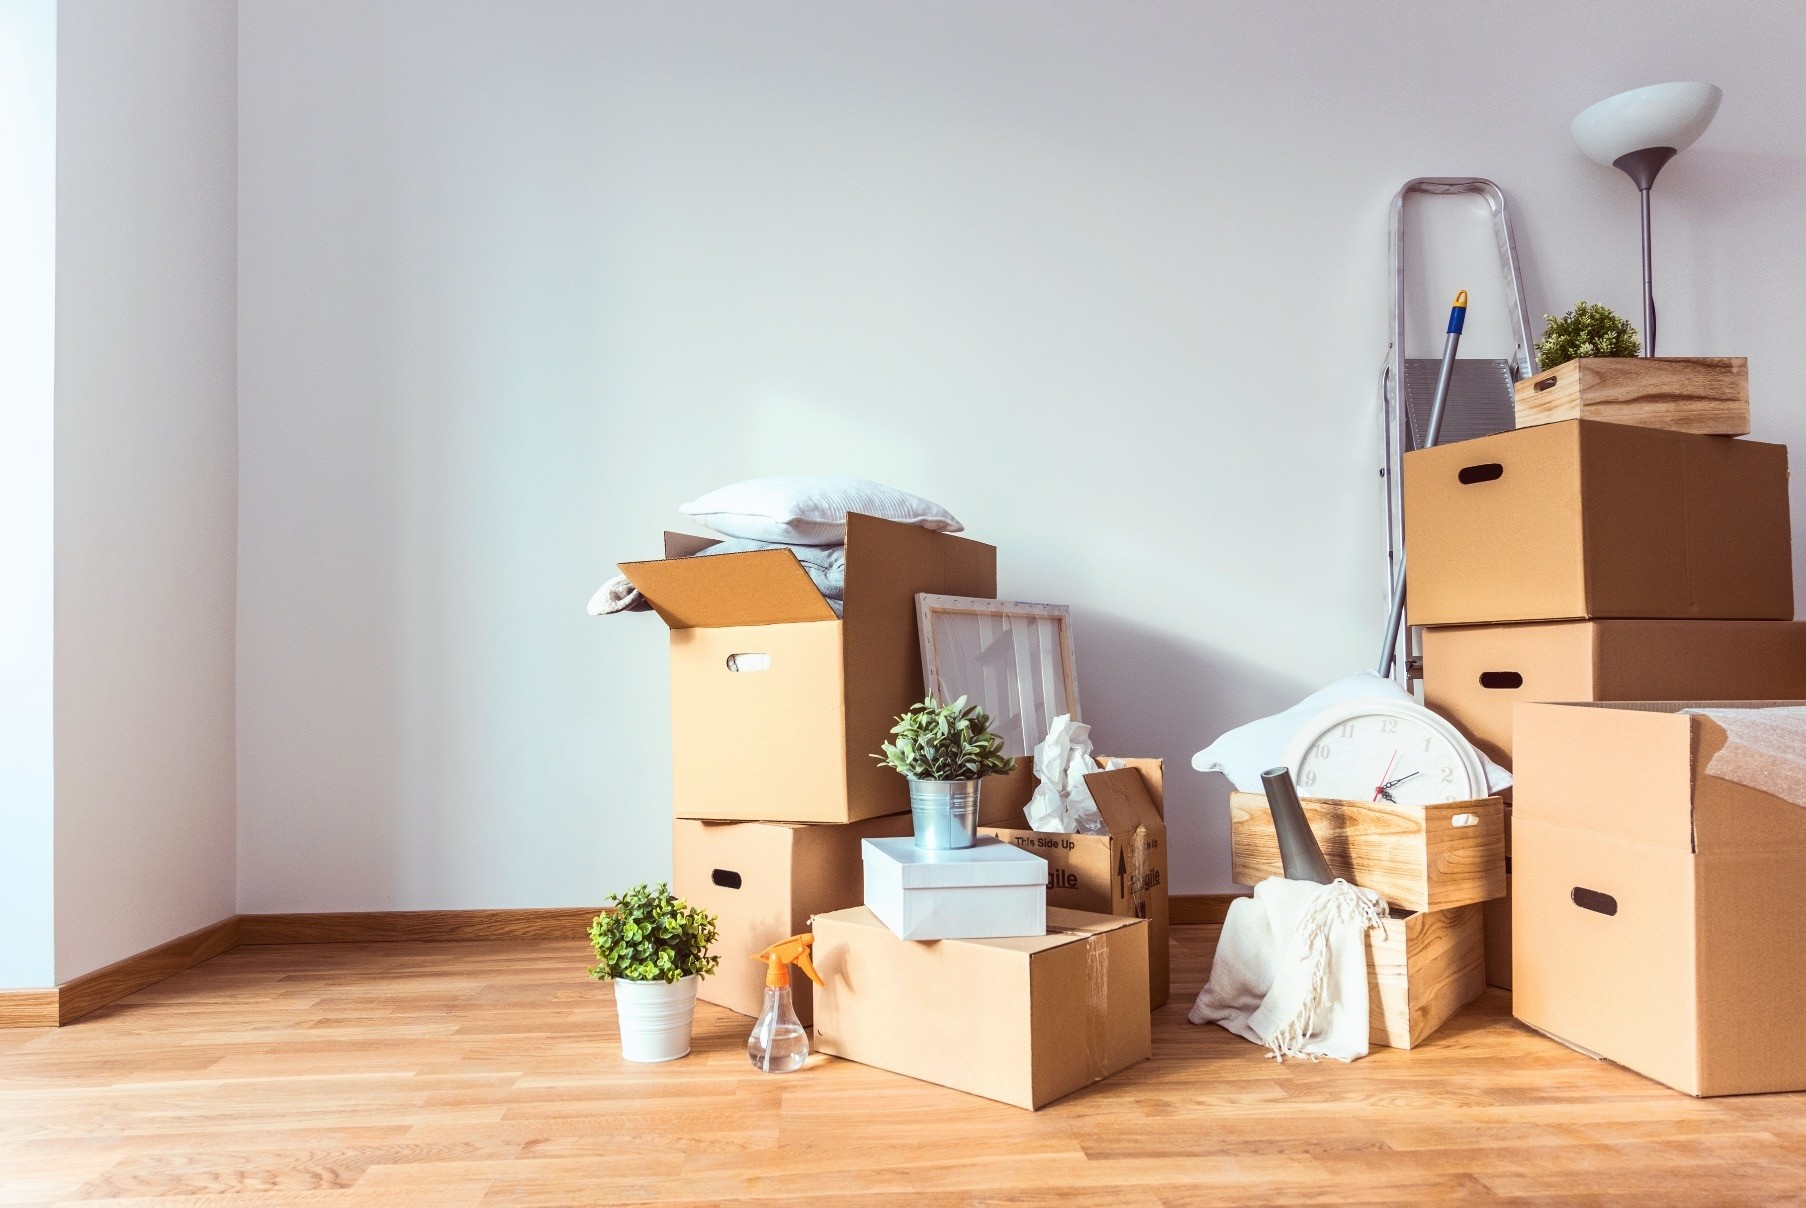 Moving house is an art form in Turkey. You can either hire a moving company for a fee or try to handle packing and moving your stuff yourself, which may not be an easy task.